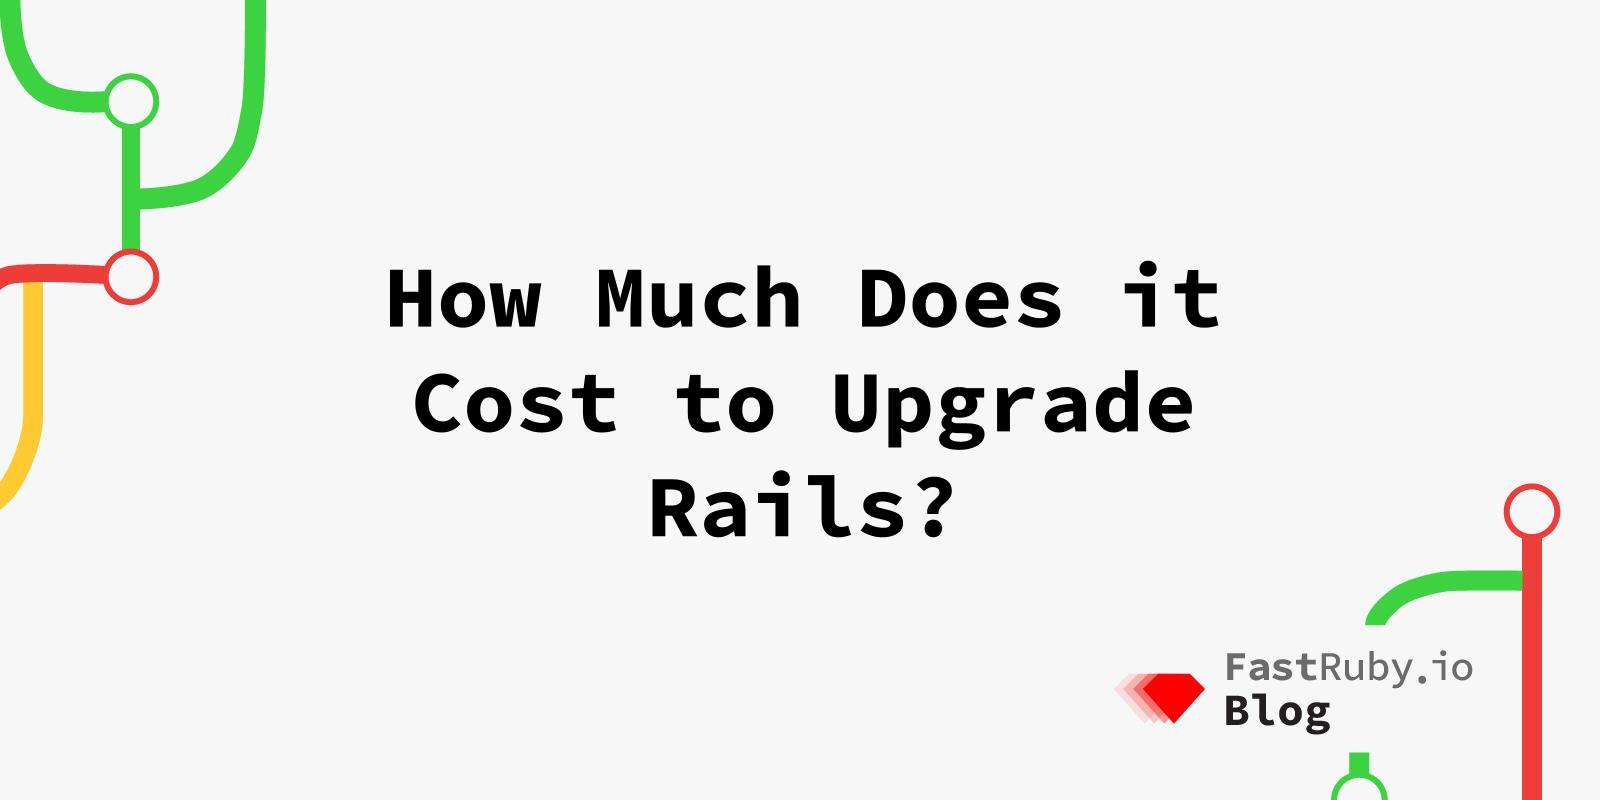 How Much Does it Cost to Upgrade Rails?